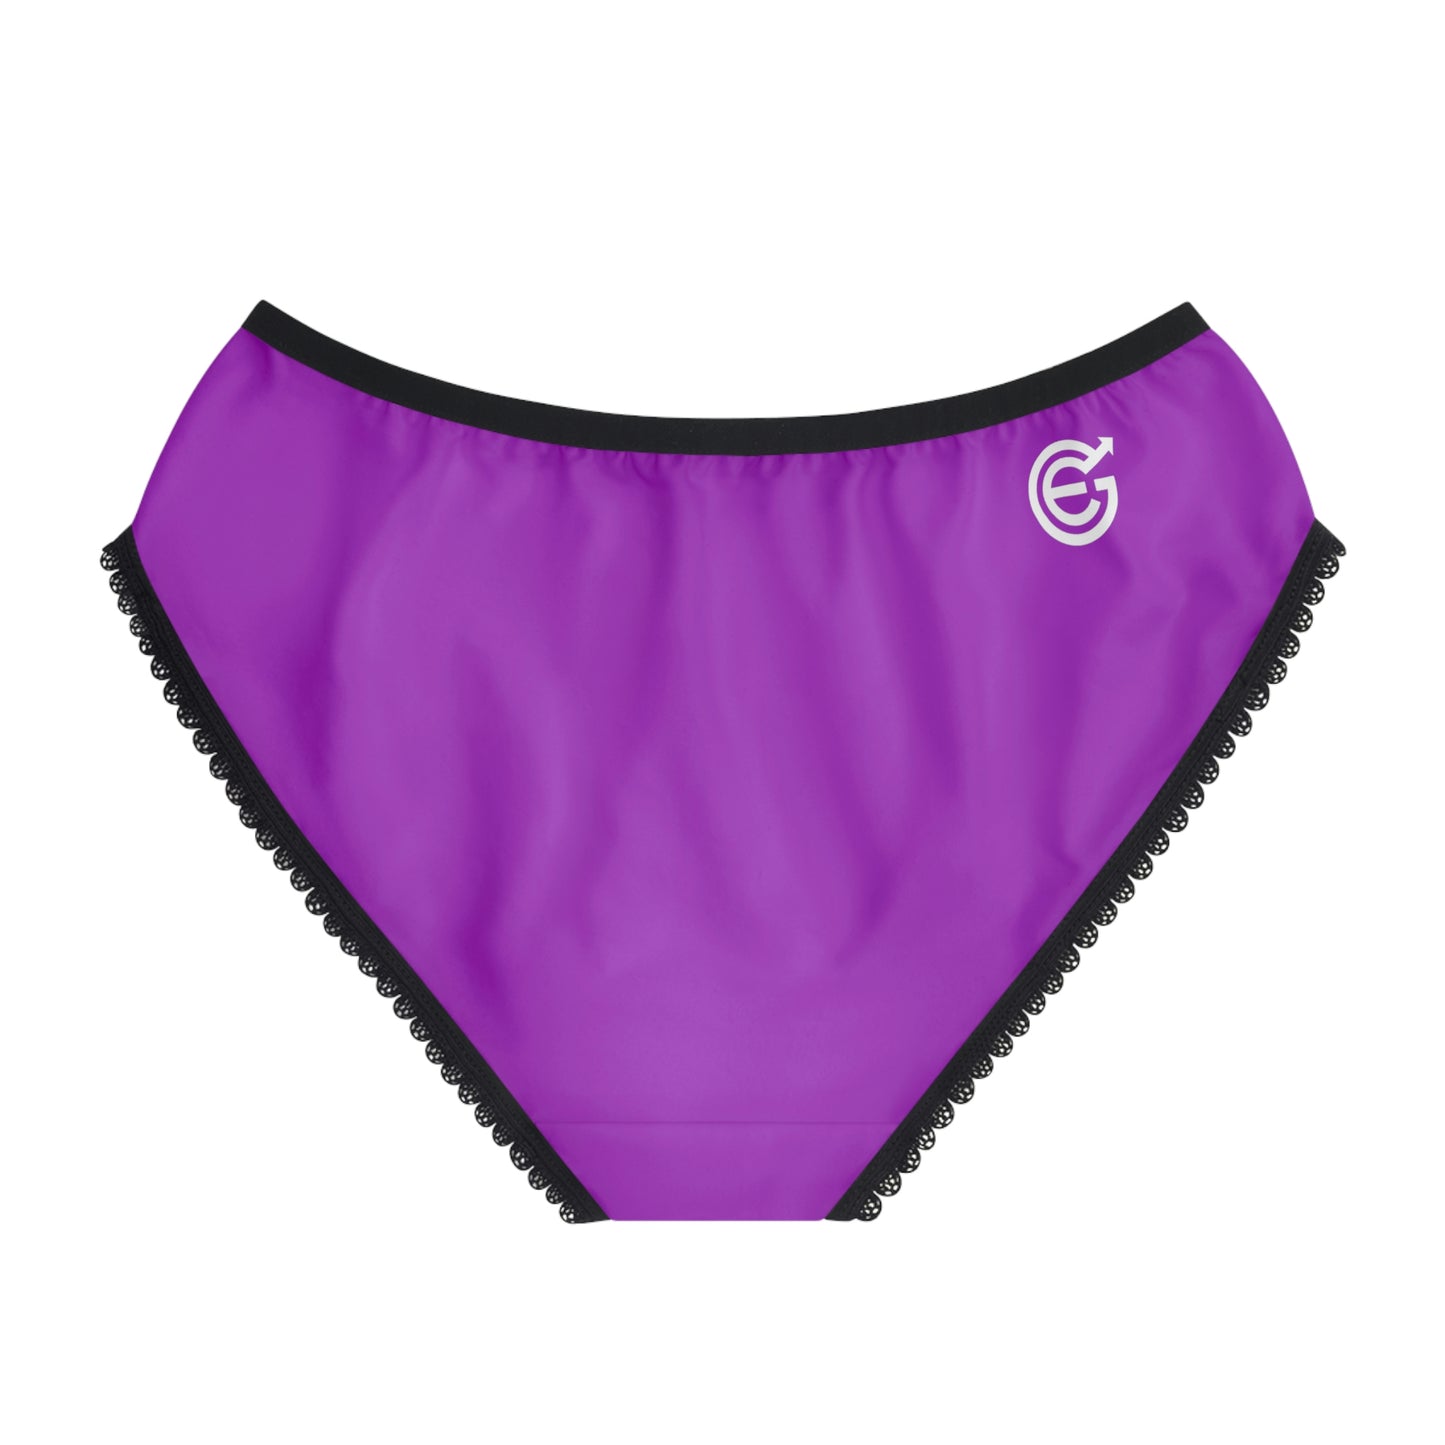 China - Women's Briefs in EverGrow Colors - evergrow on front and EGC logo on back